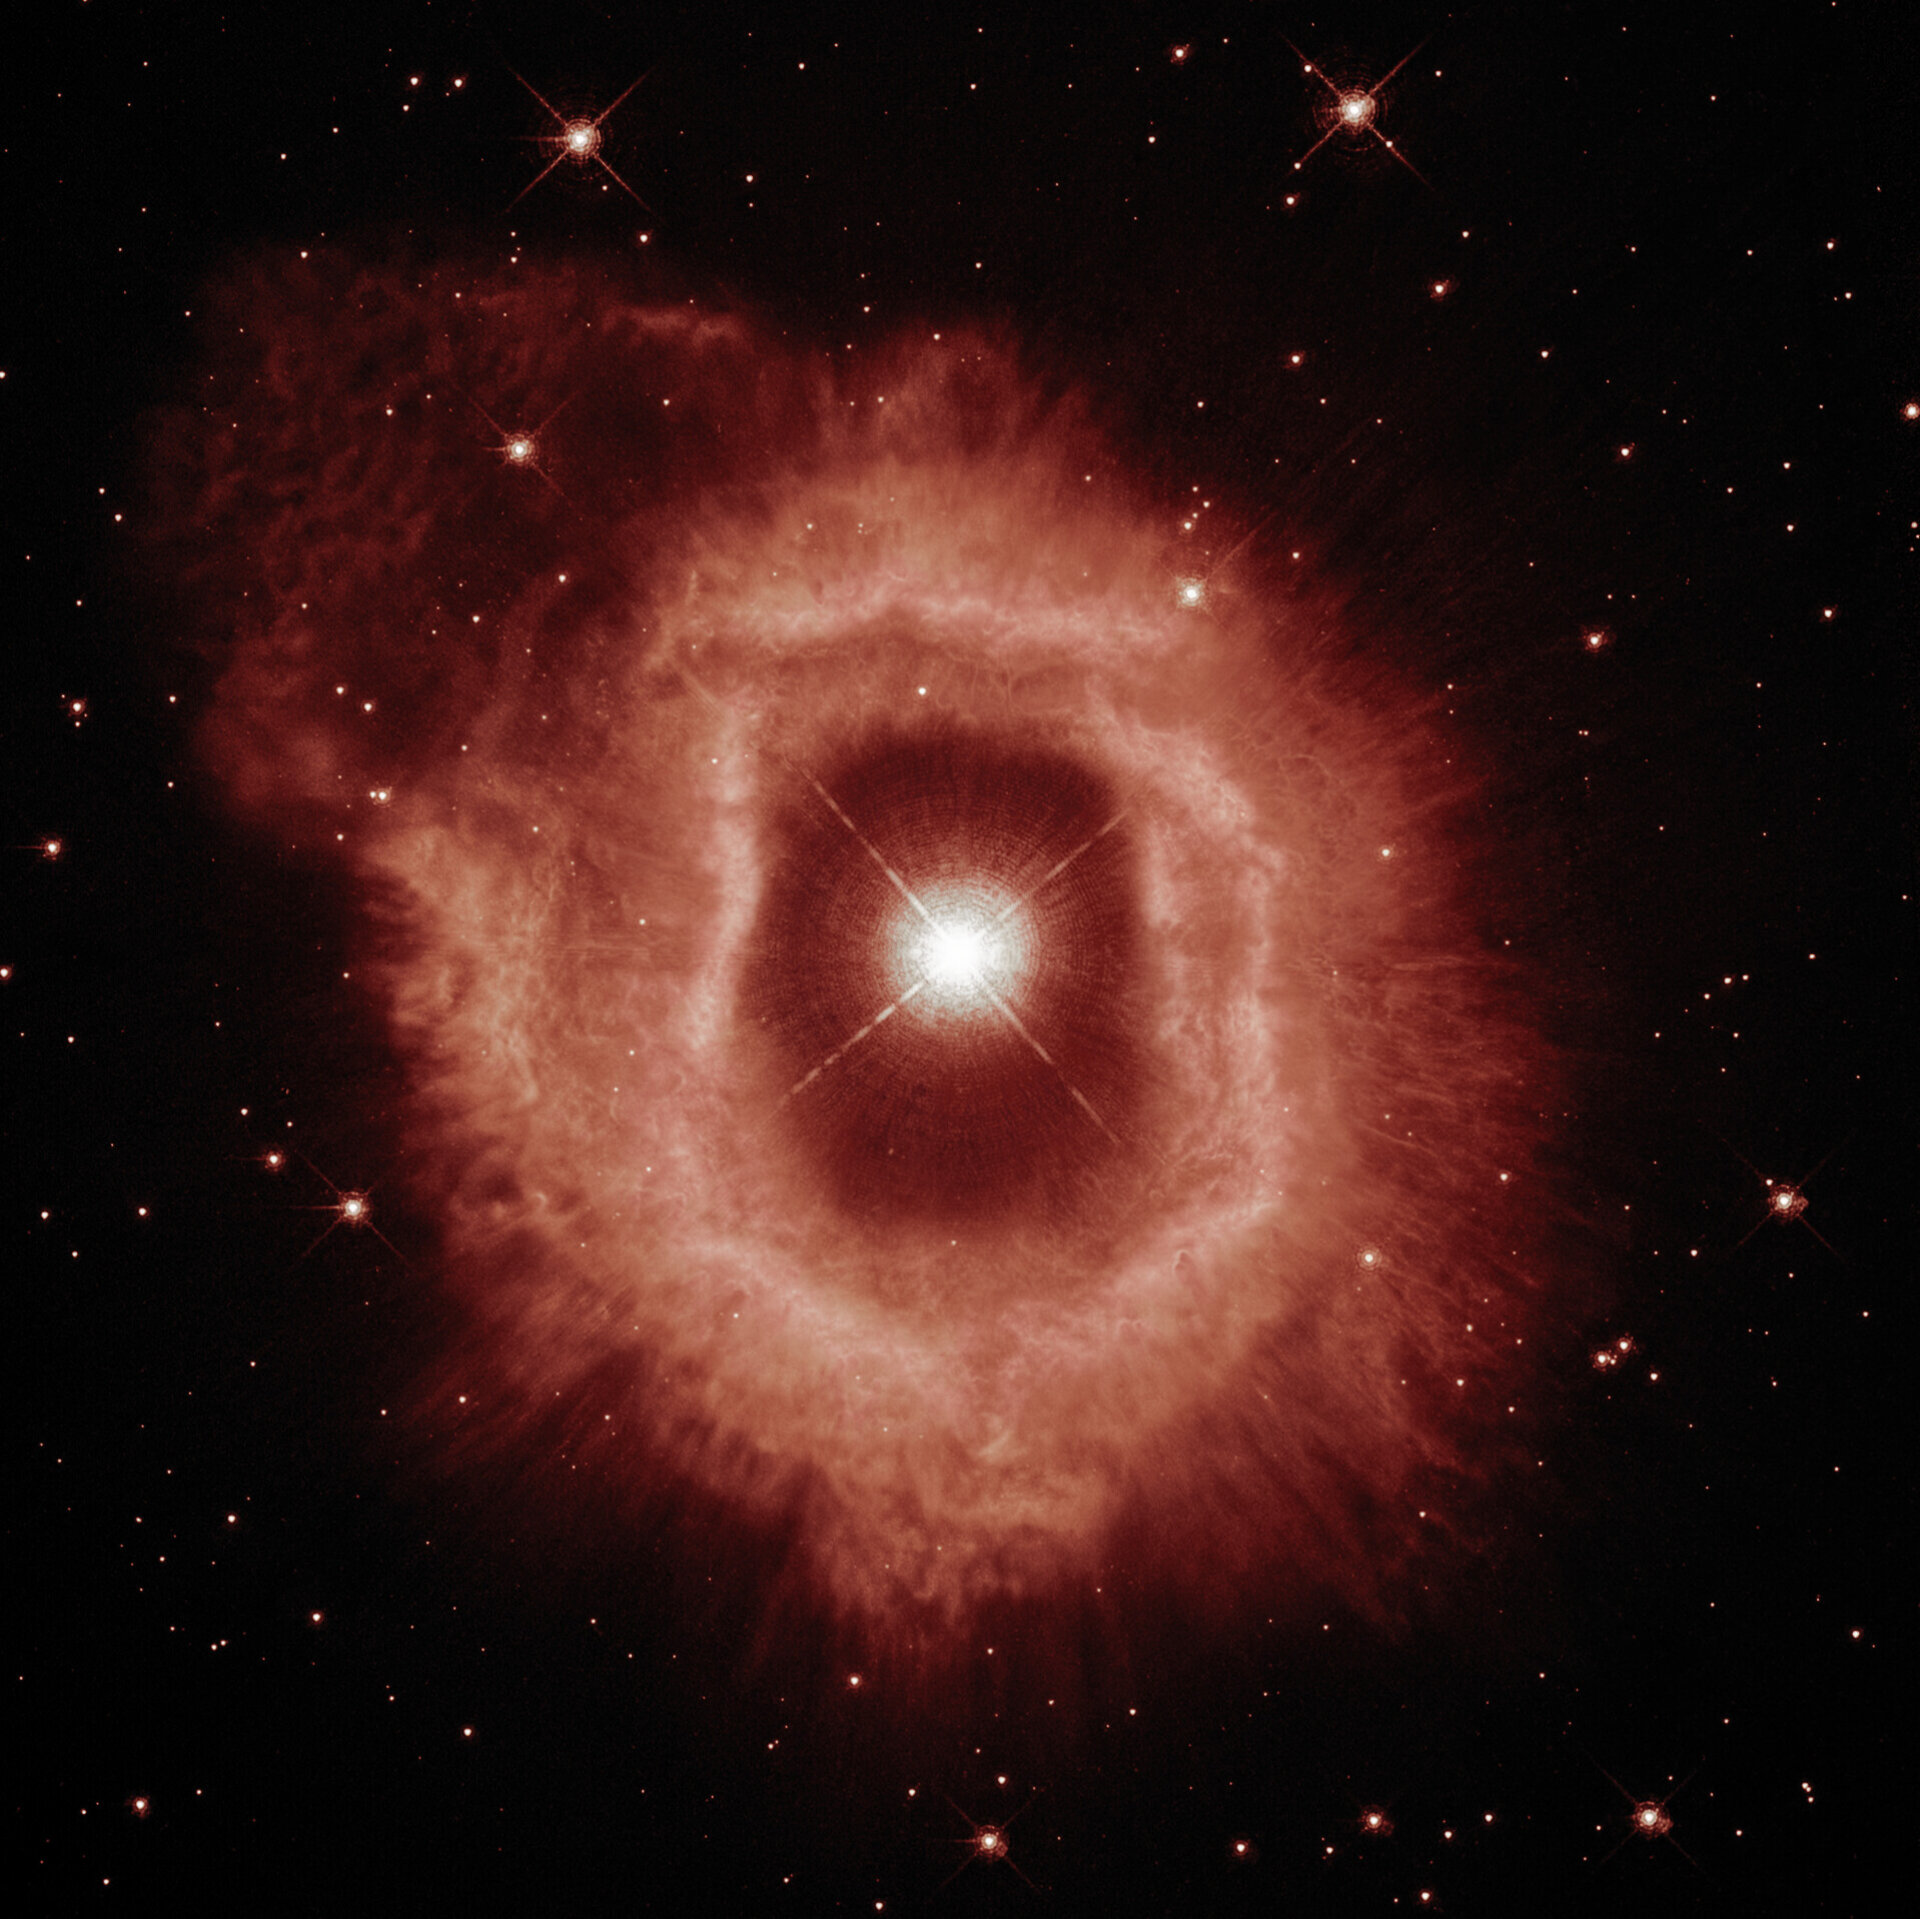 A closer look at Hubble’s 31st anniversary snapshot - red